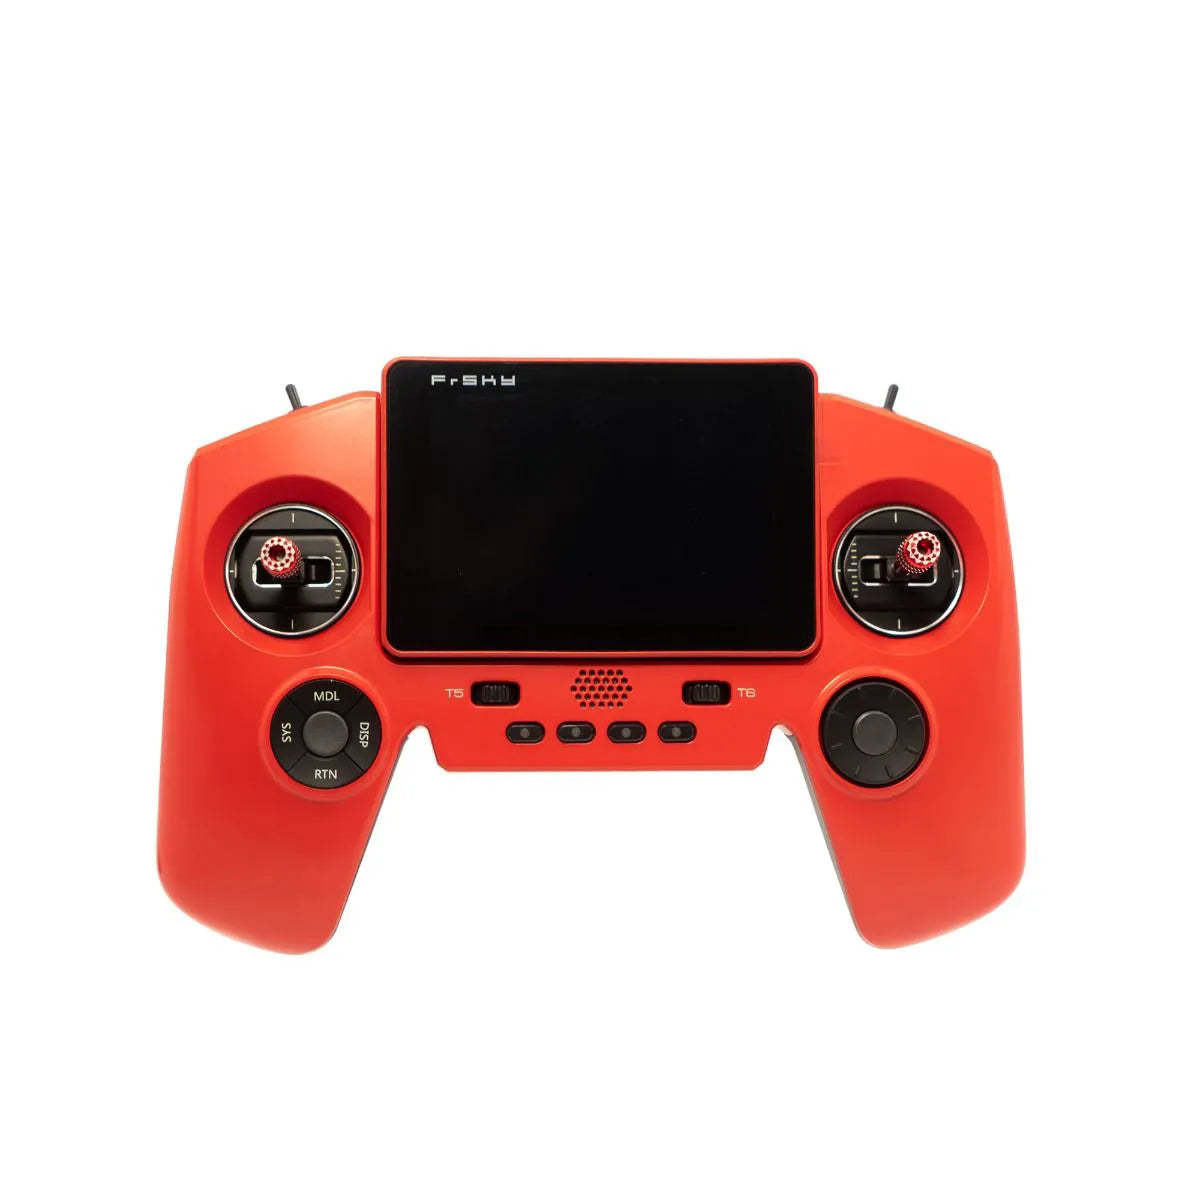 FrSky TWIN X-Lite Transmitter - Dual 2.4G Radio System 6-axis Gyroscope Sensor 3.5 Inch Screen FPV Drone Airplane Remote Controller